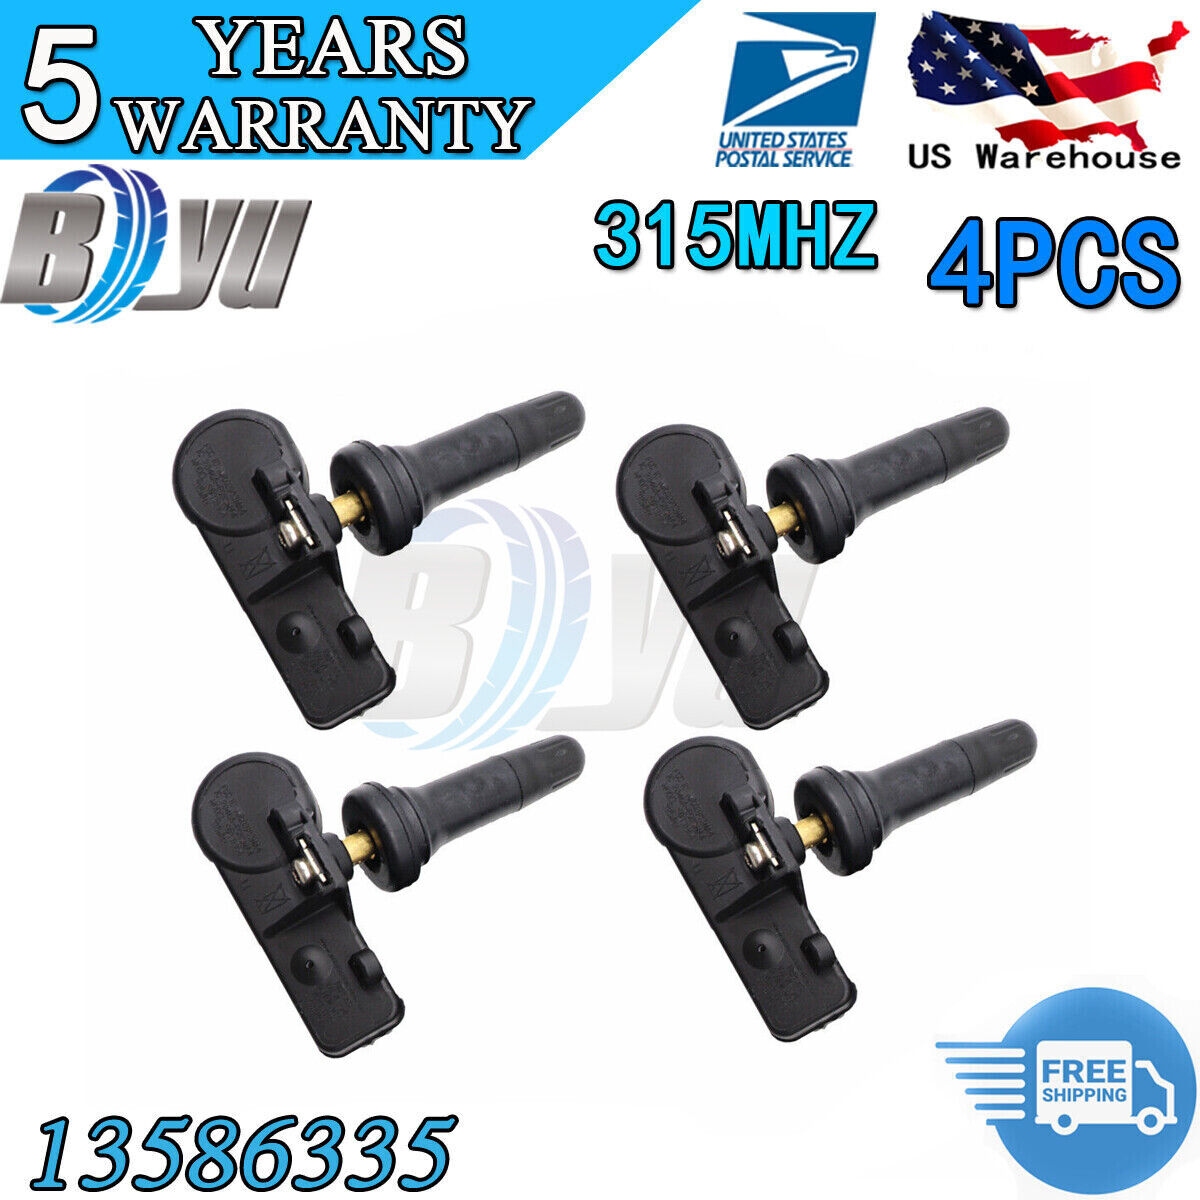 Set of 4pcs New TPMS Tire Pressure Monitoring Sensors For Chevy GMC 13586335 US